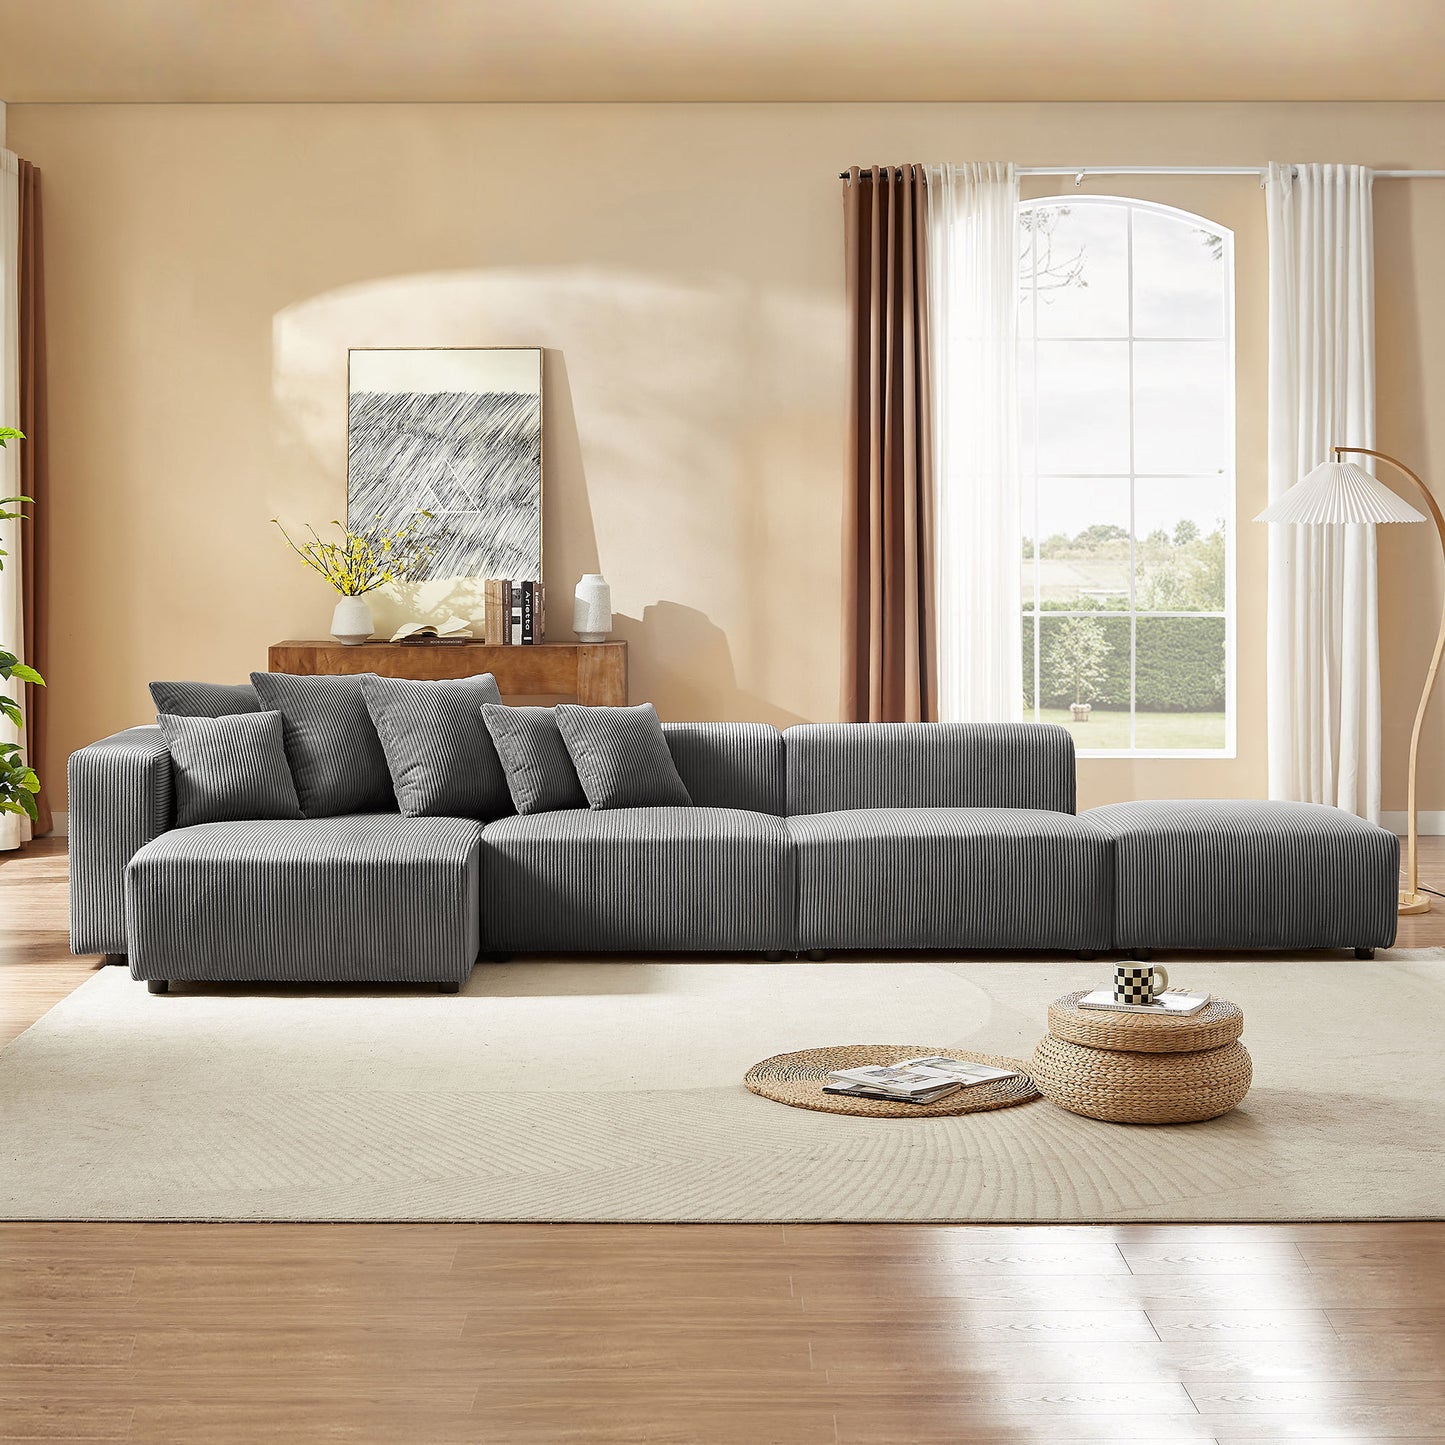 Soft Corduroy Sectional Modular Sofa 4 Piece Set, Small L-Shaped Chaise Couch for Living Room, Apartment, Office, Gray